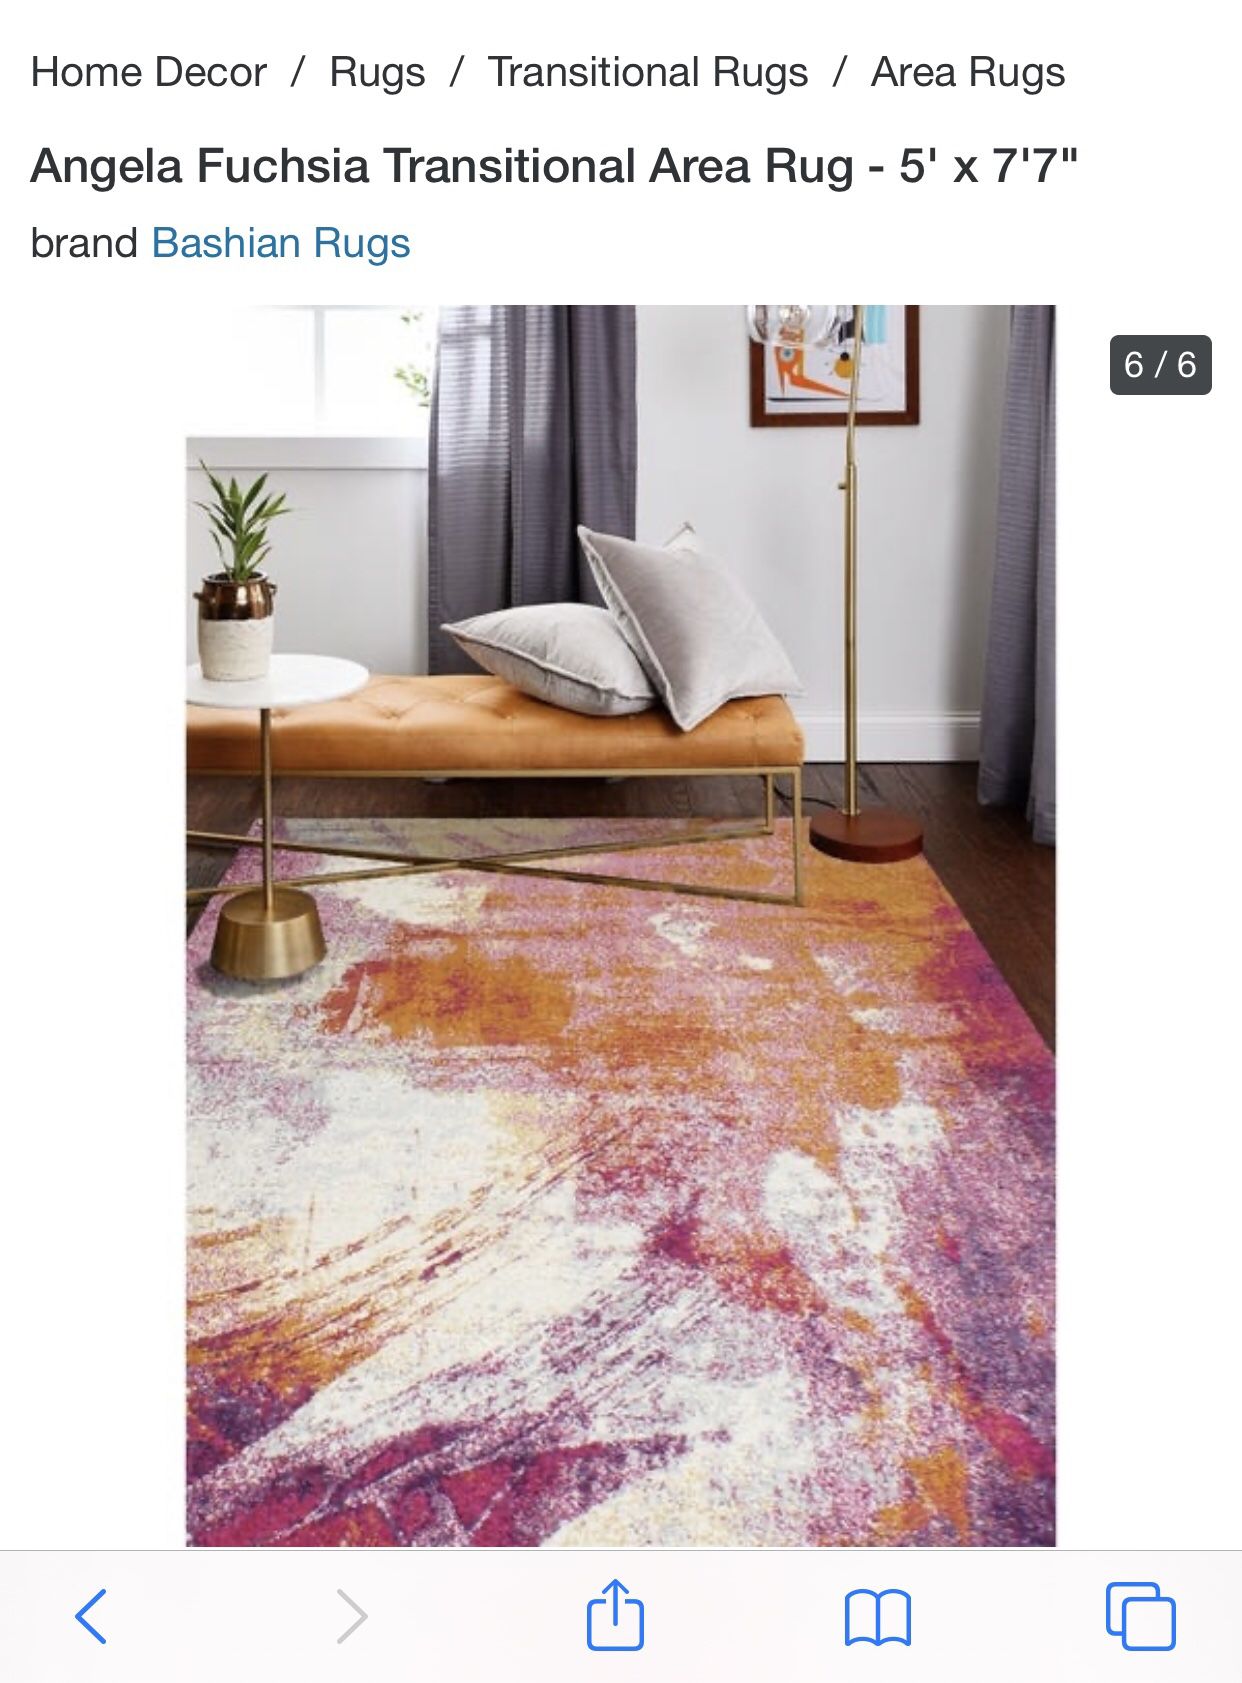 Fairly new abstract rug